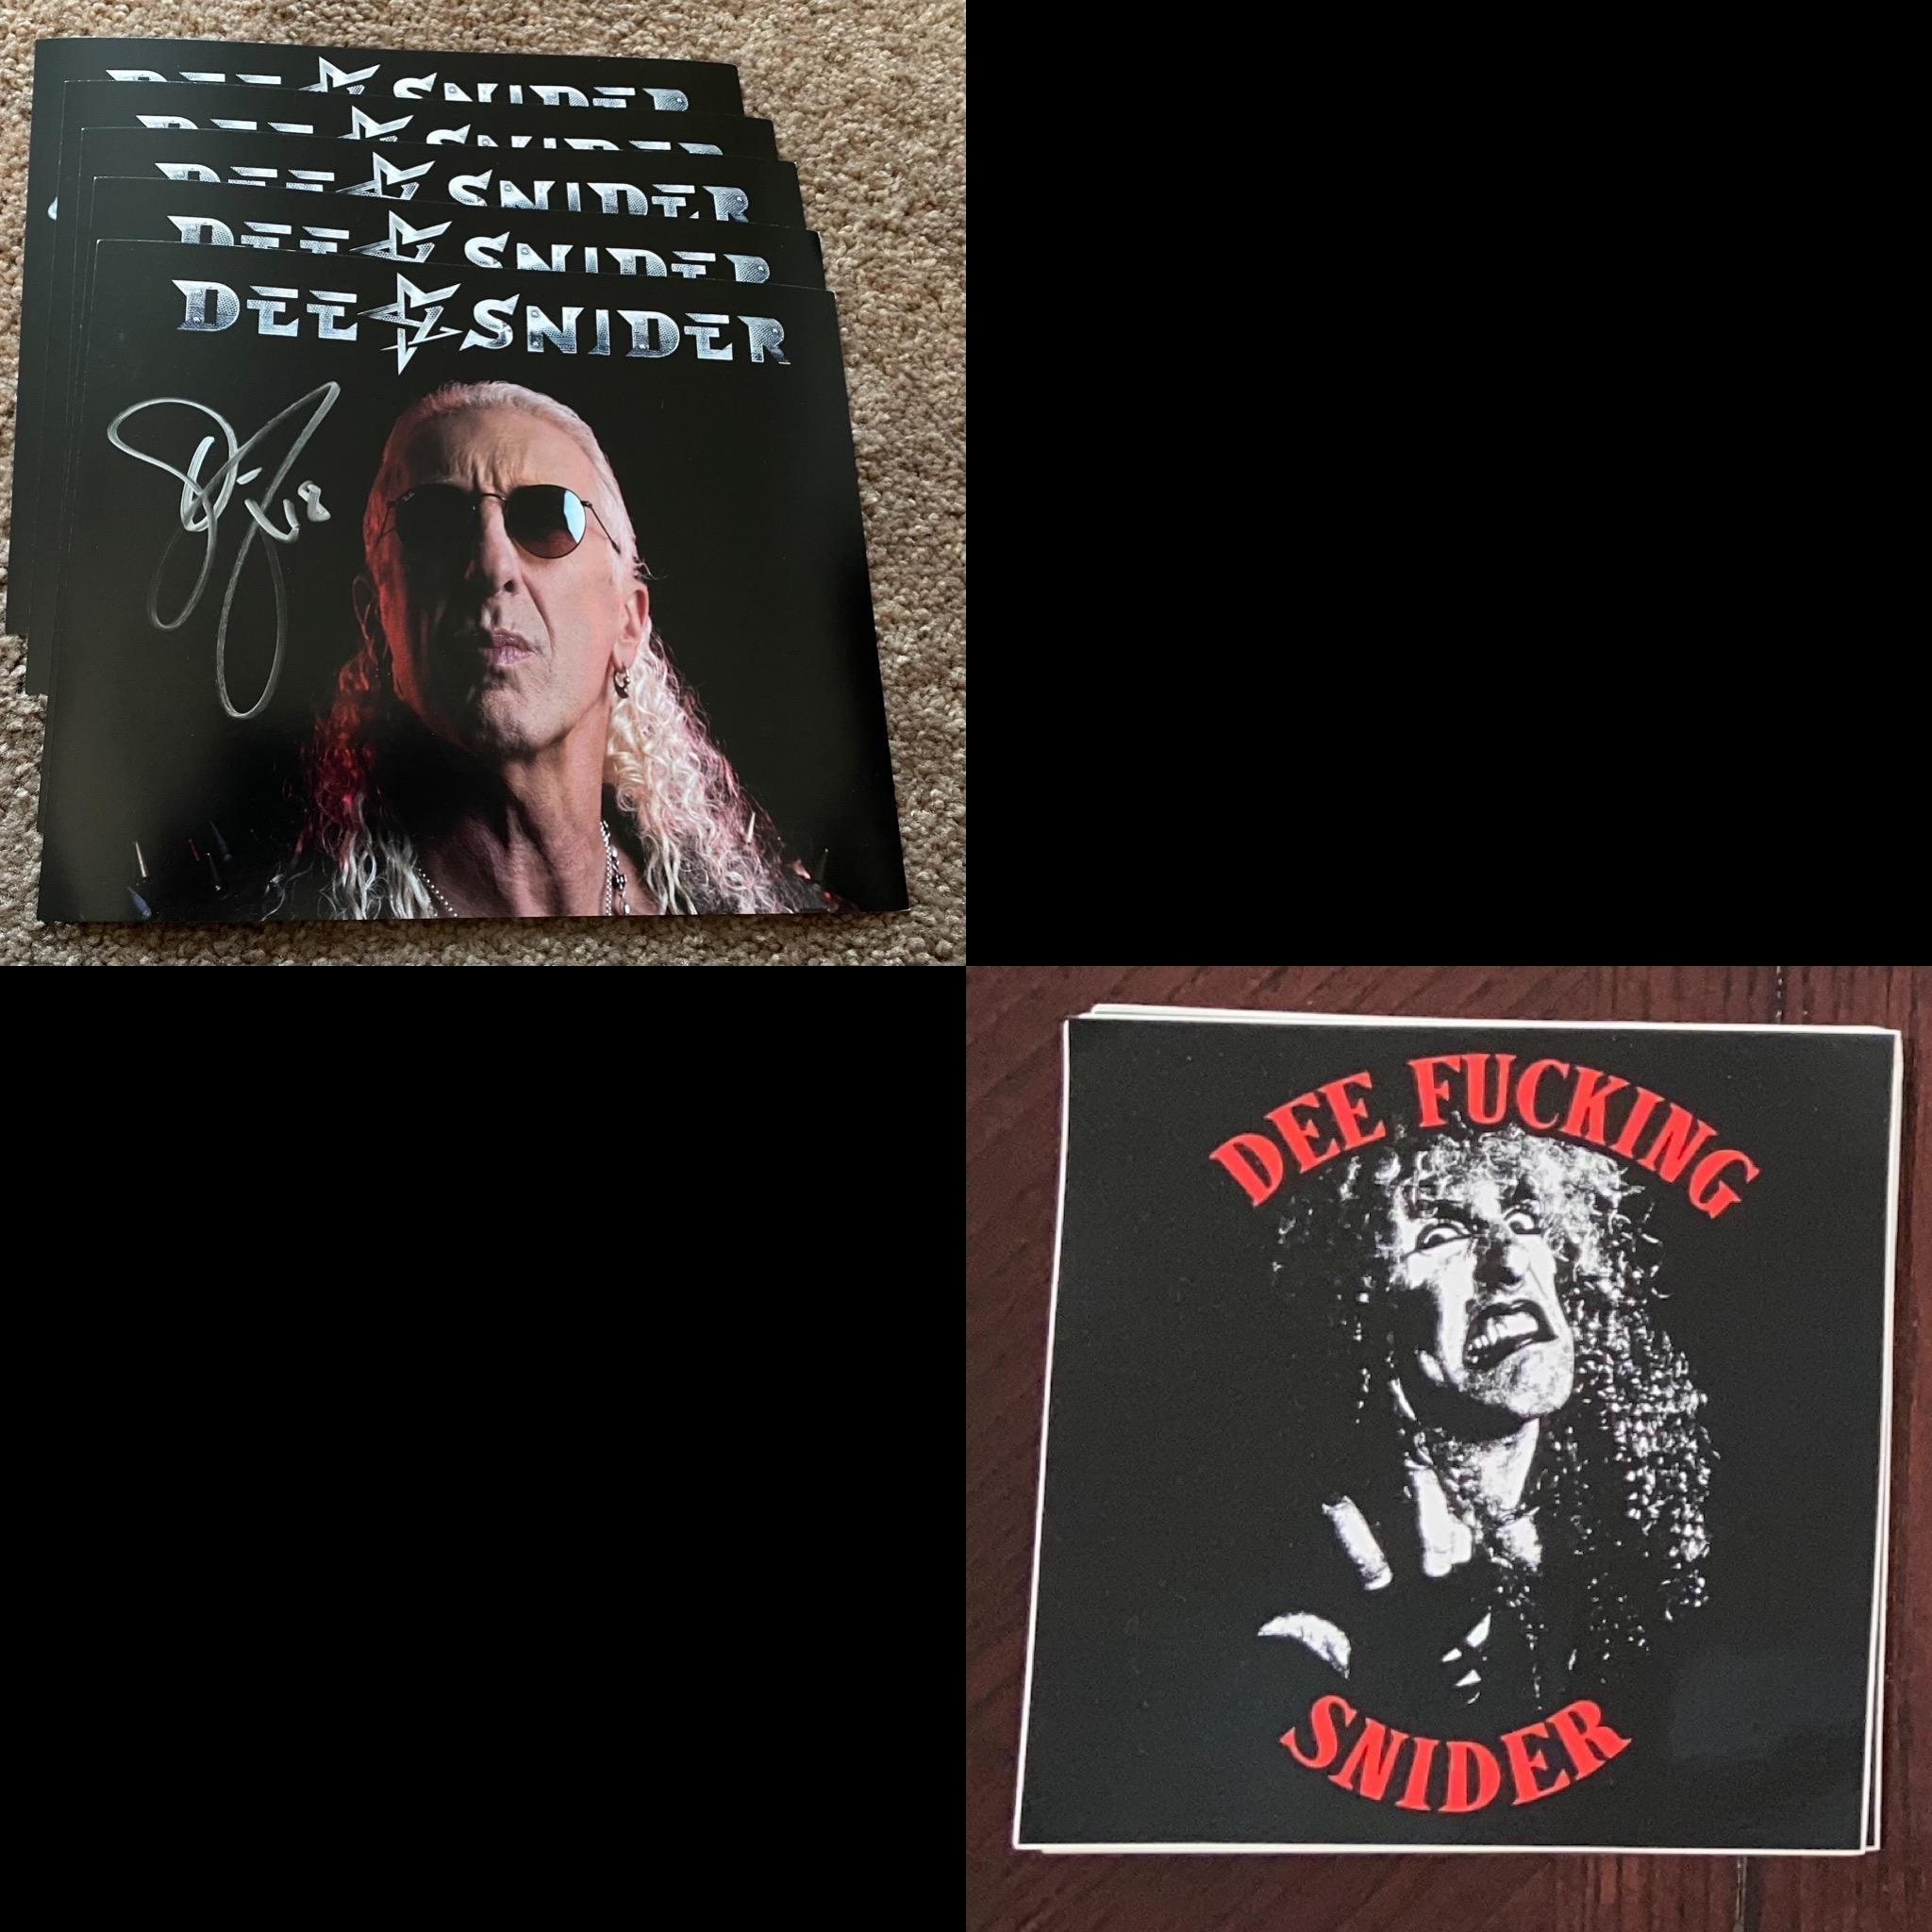 Signed photos/stickers